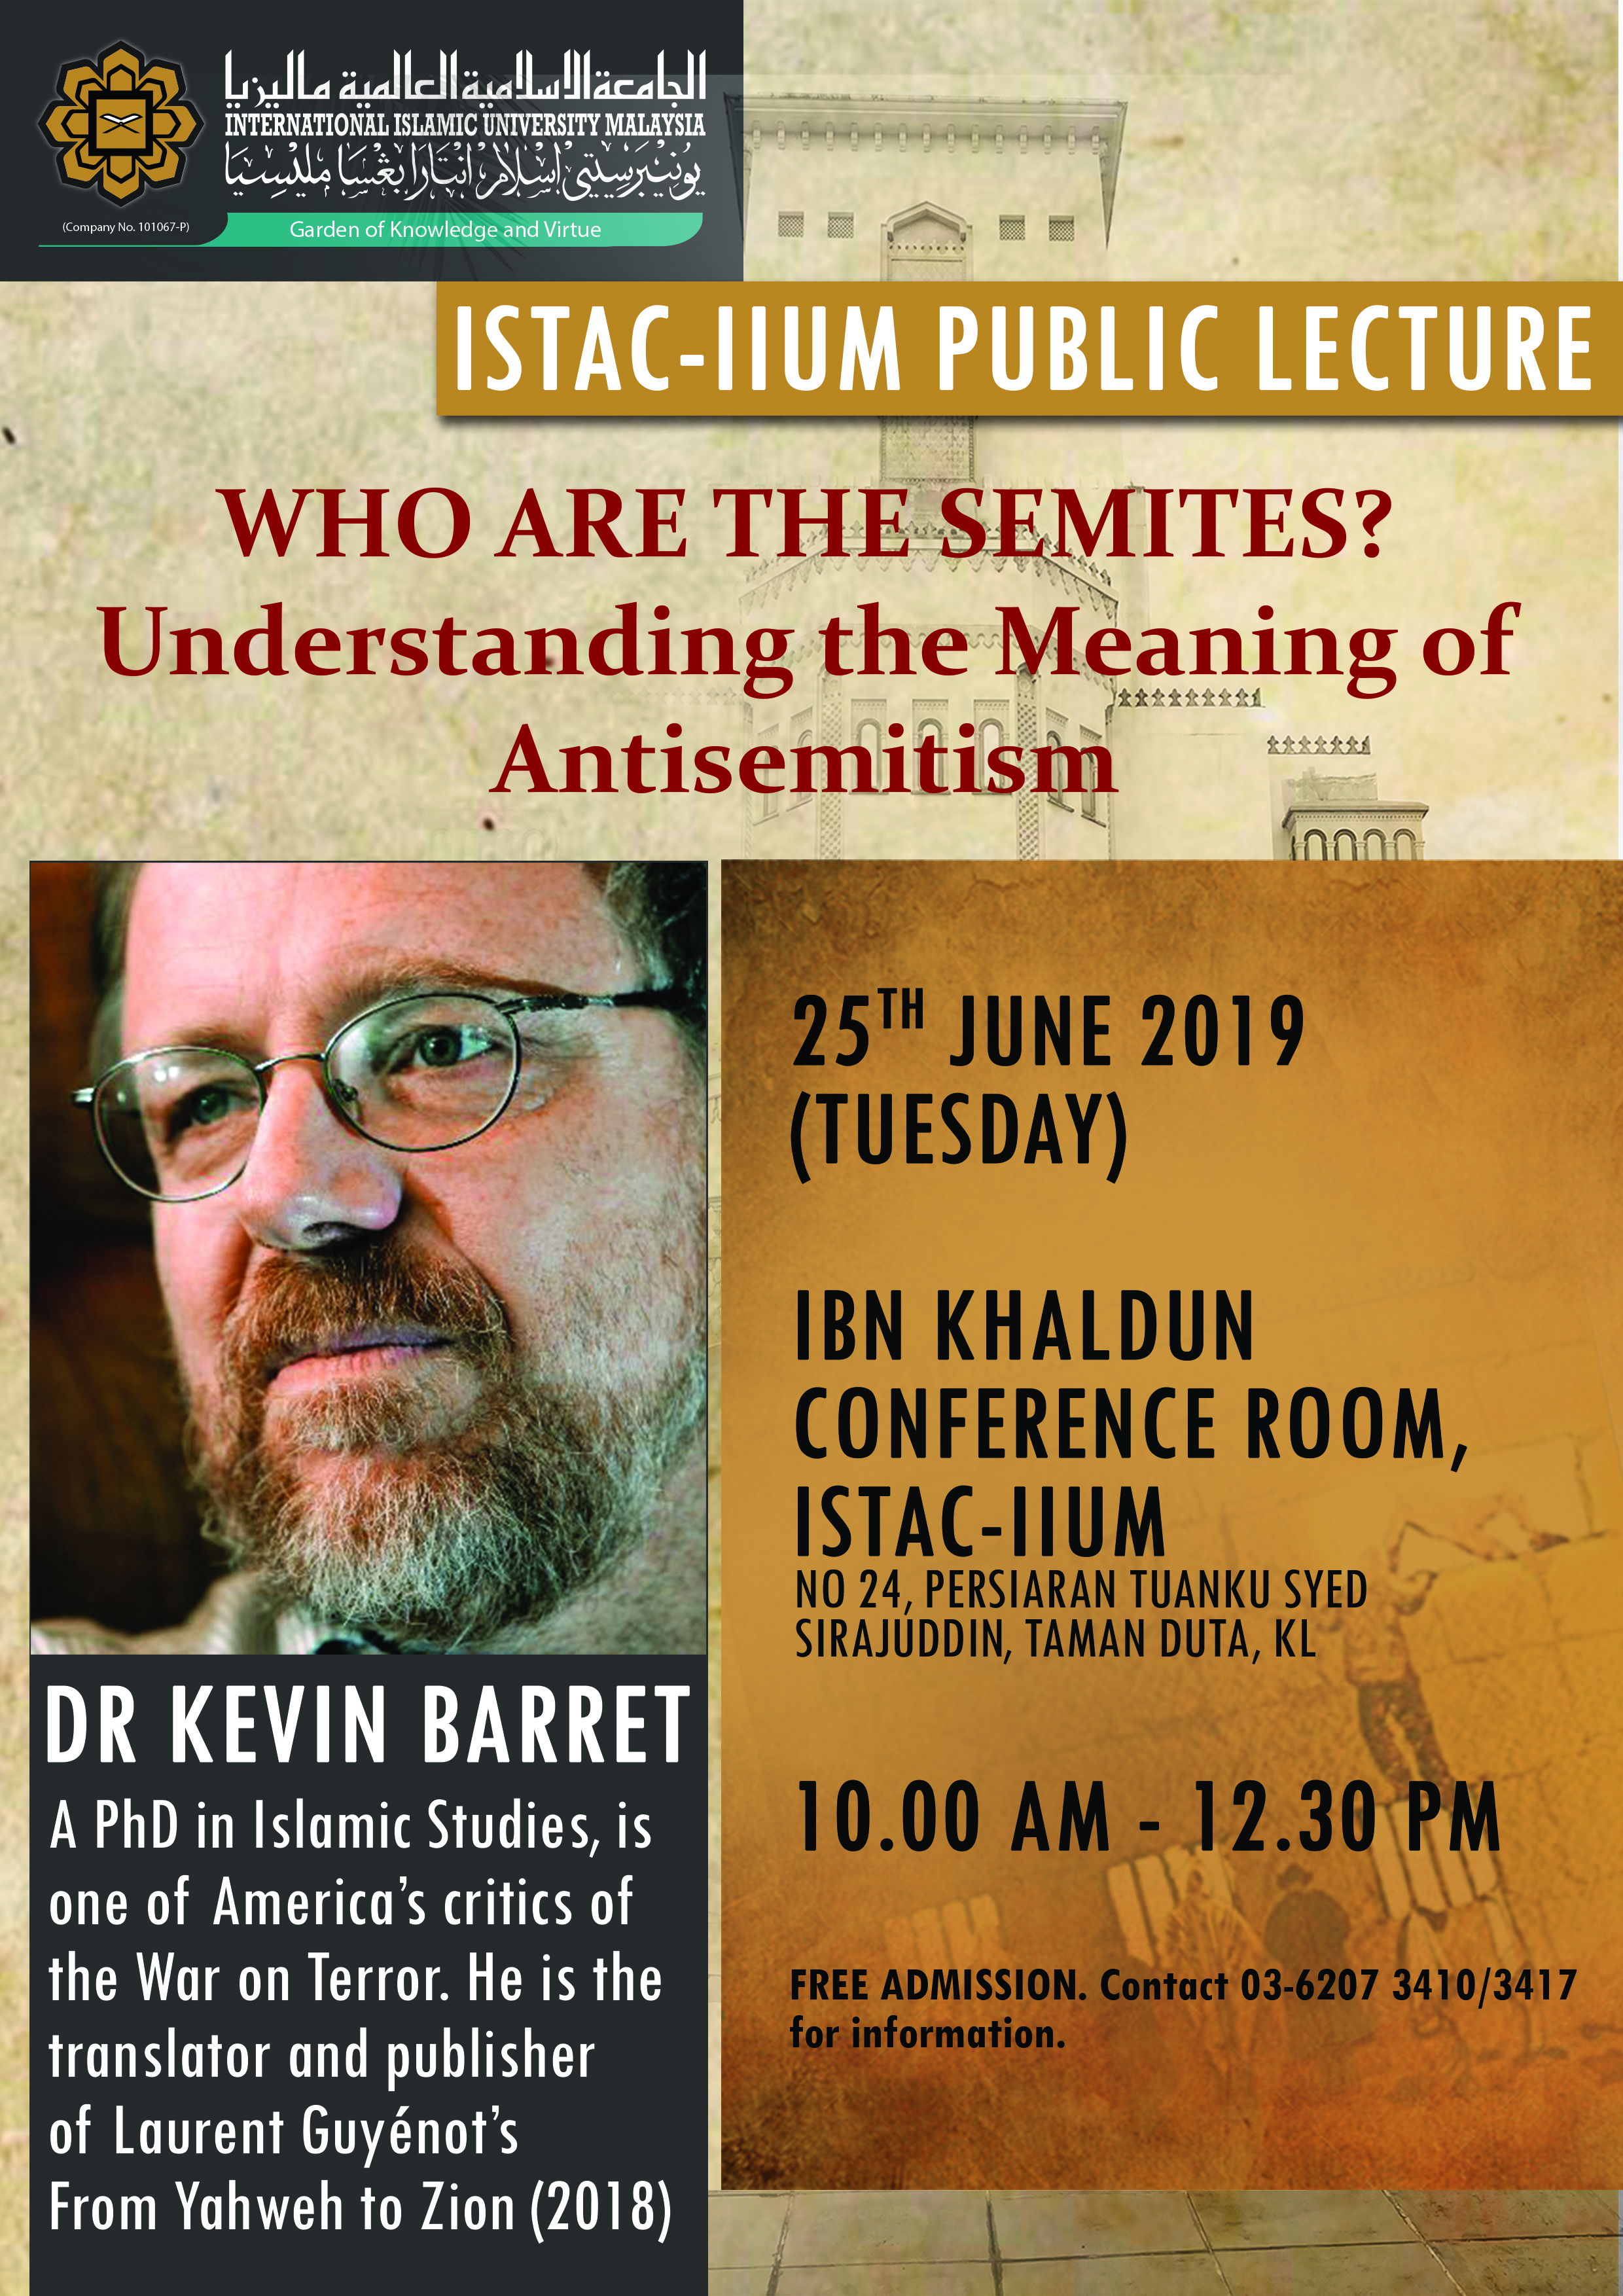 IIUM-ISTAC PUBLIC LECTURE - WHO ARE THE SEMITES?